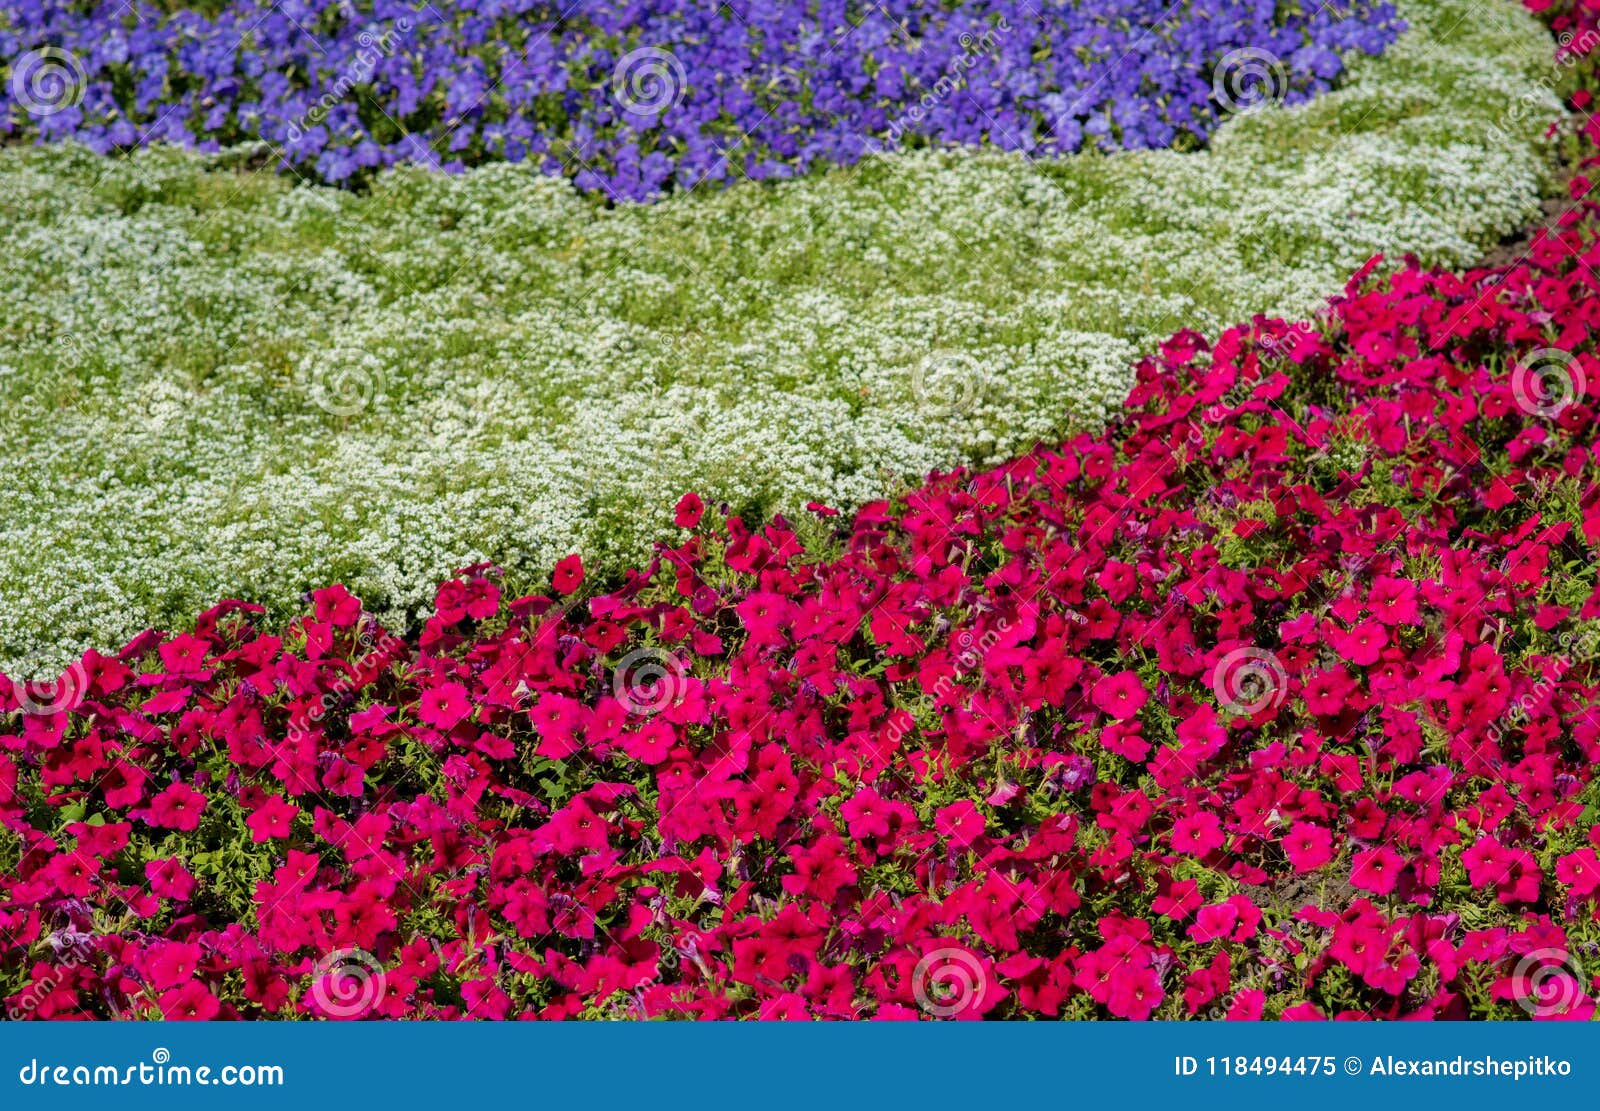 Flower Bed Red White And Blue Flowers Background Of